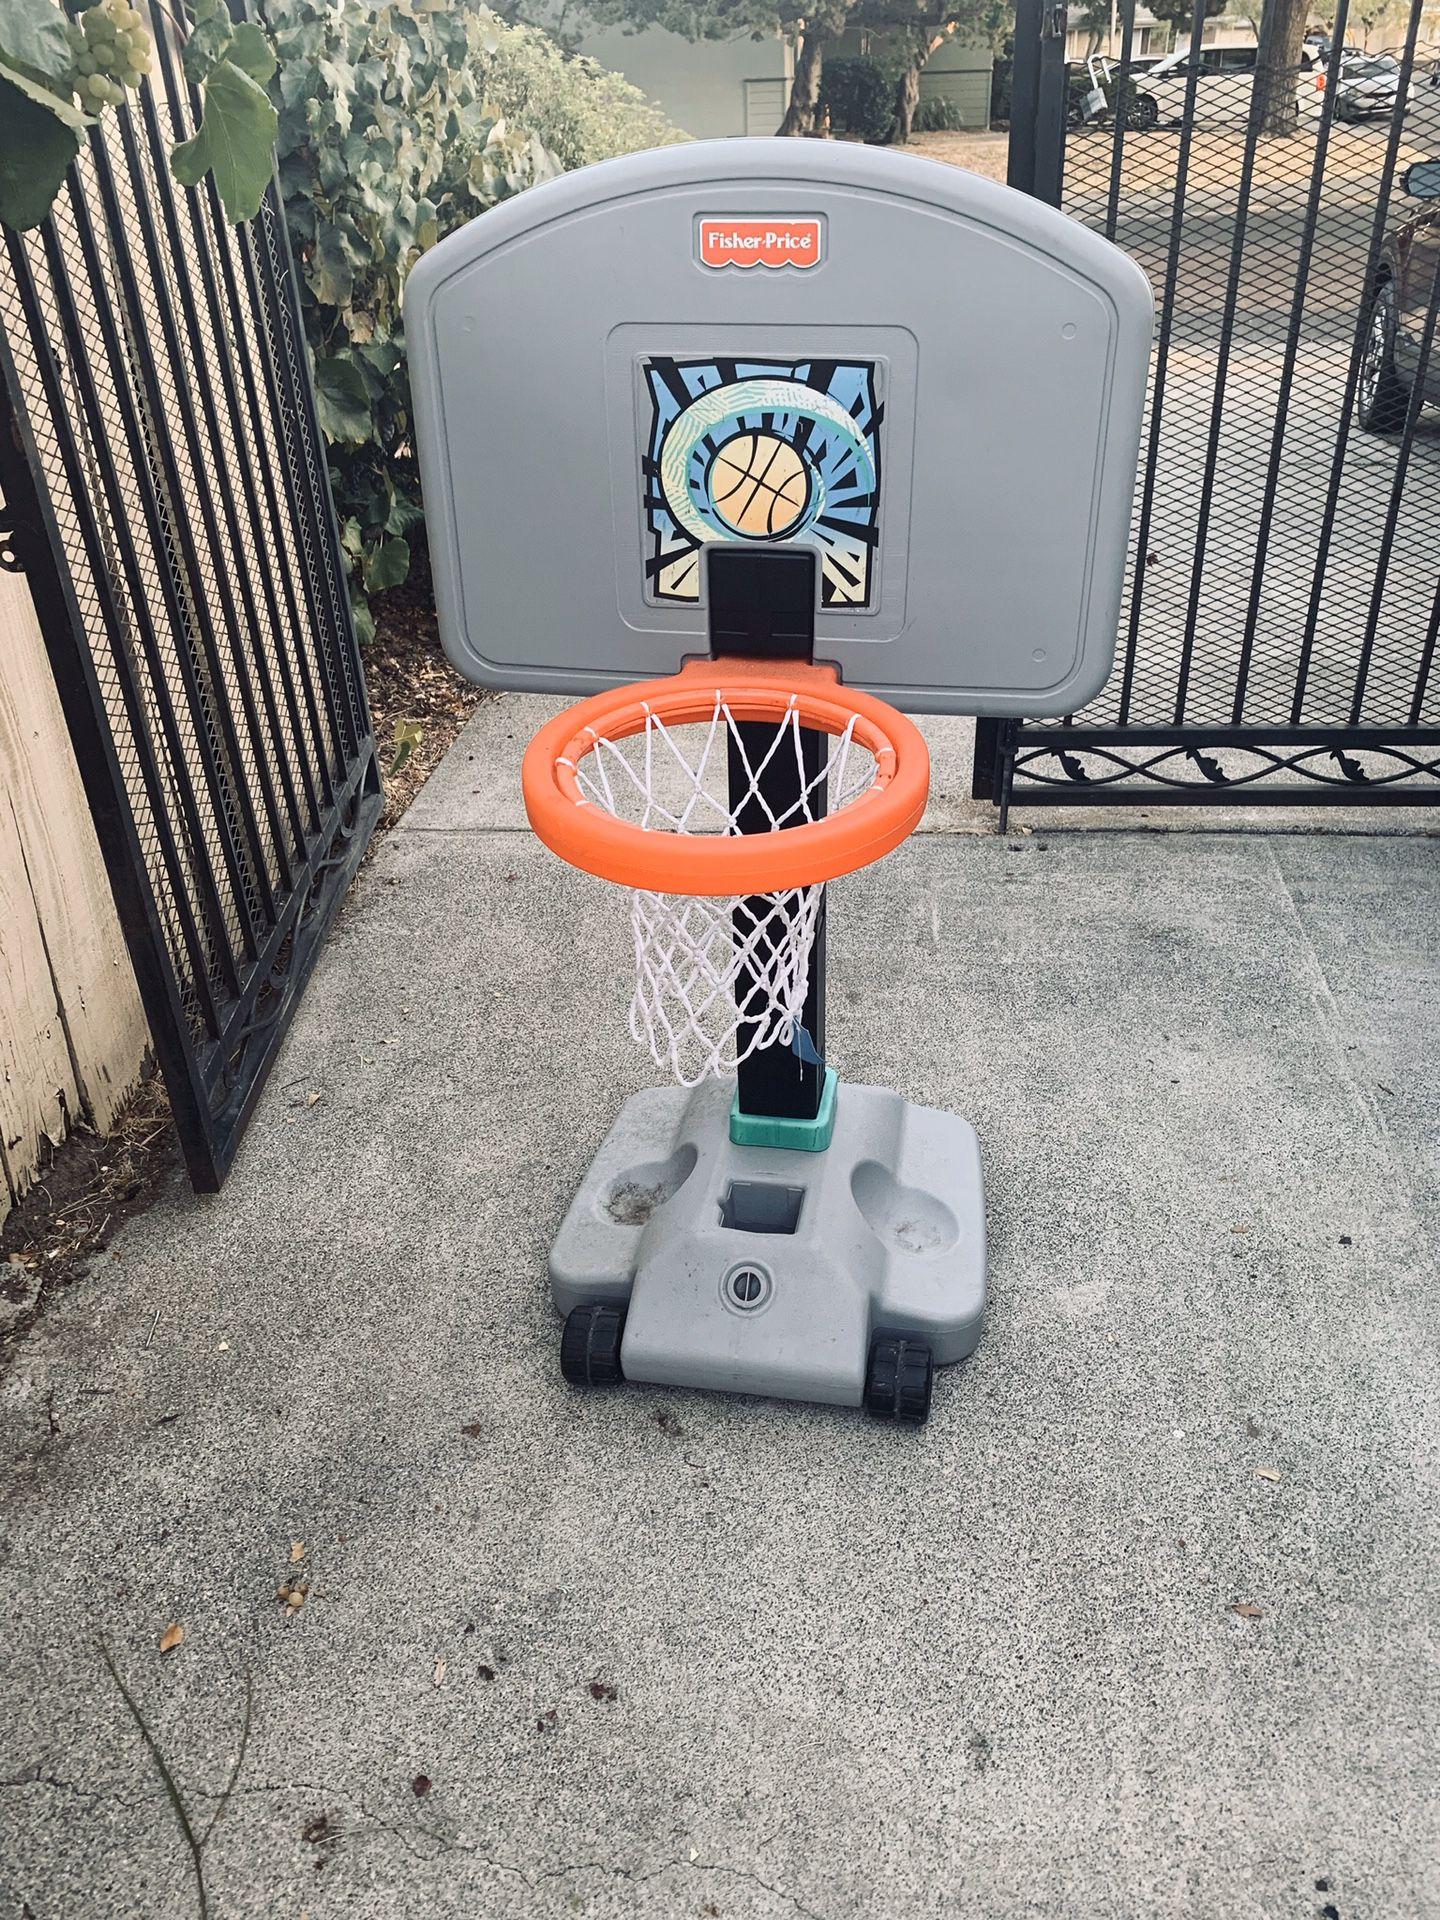 Fisher price child’s basketball hoop with wheels